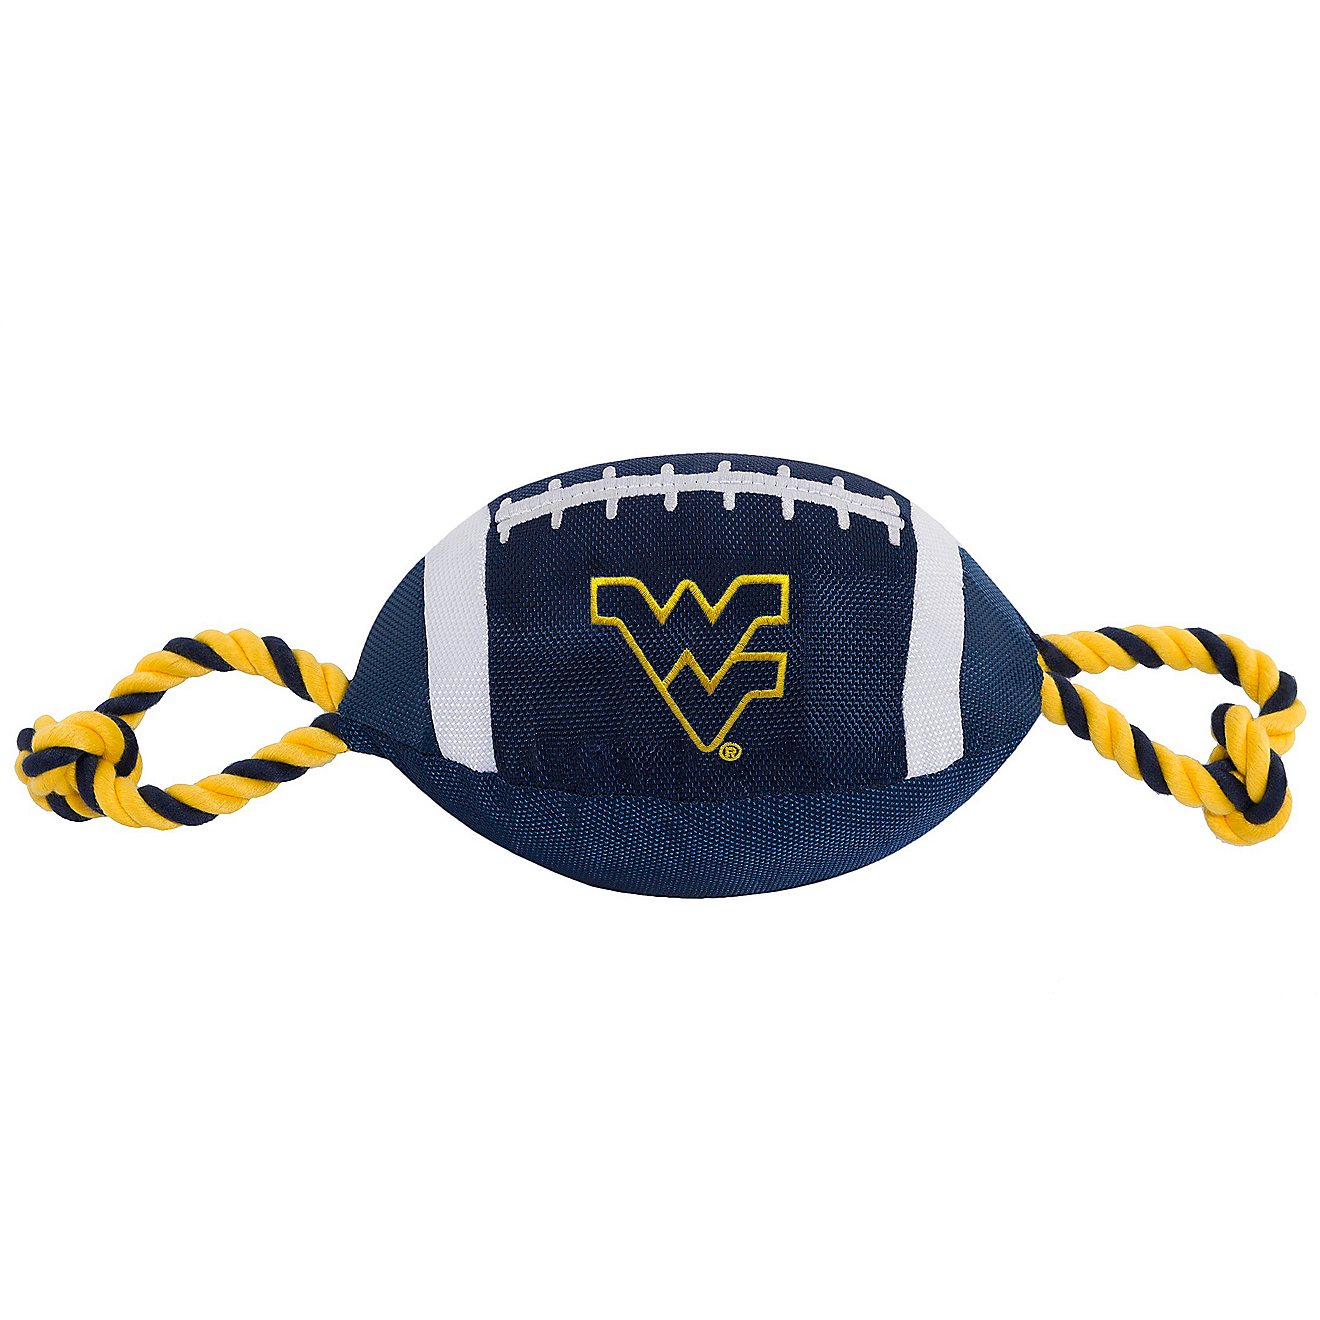 Pets First West Virginia University Nylon Football Rope Toy                                                                      - view number 1